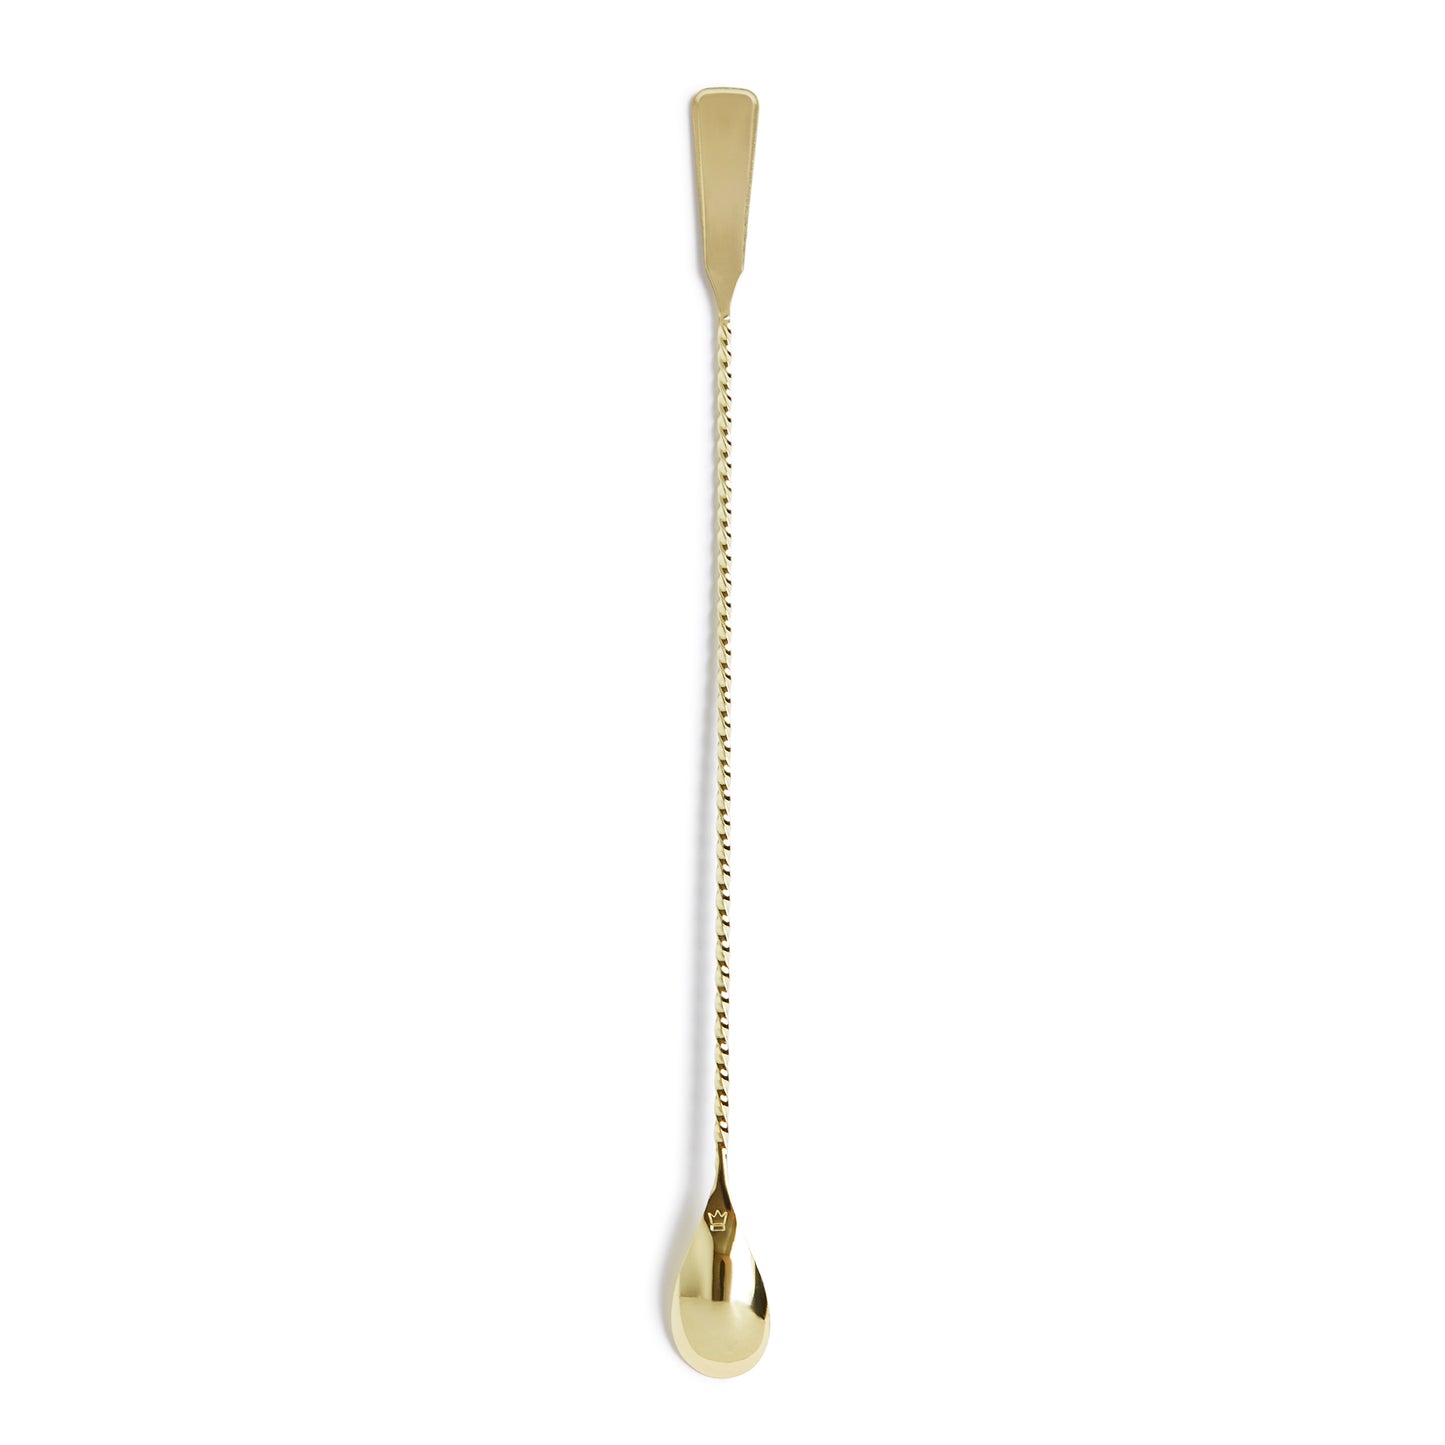 BROMLEY™ BARSPOON / GOLD-PLATED / 36CM